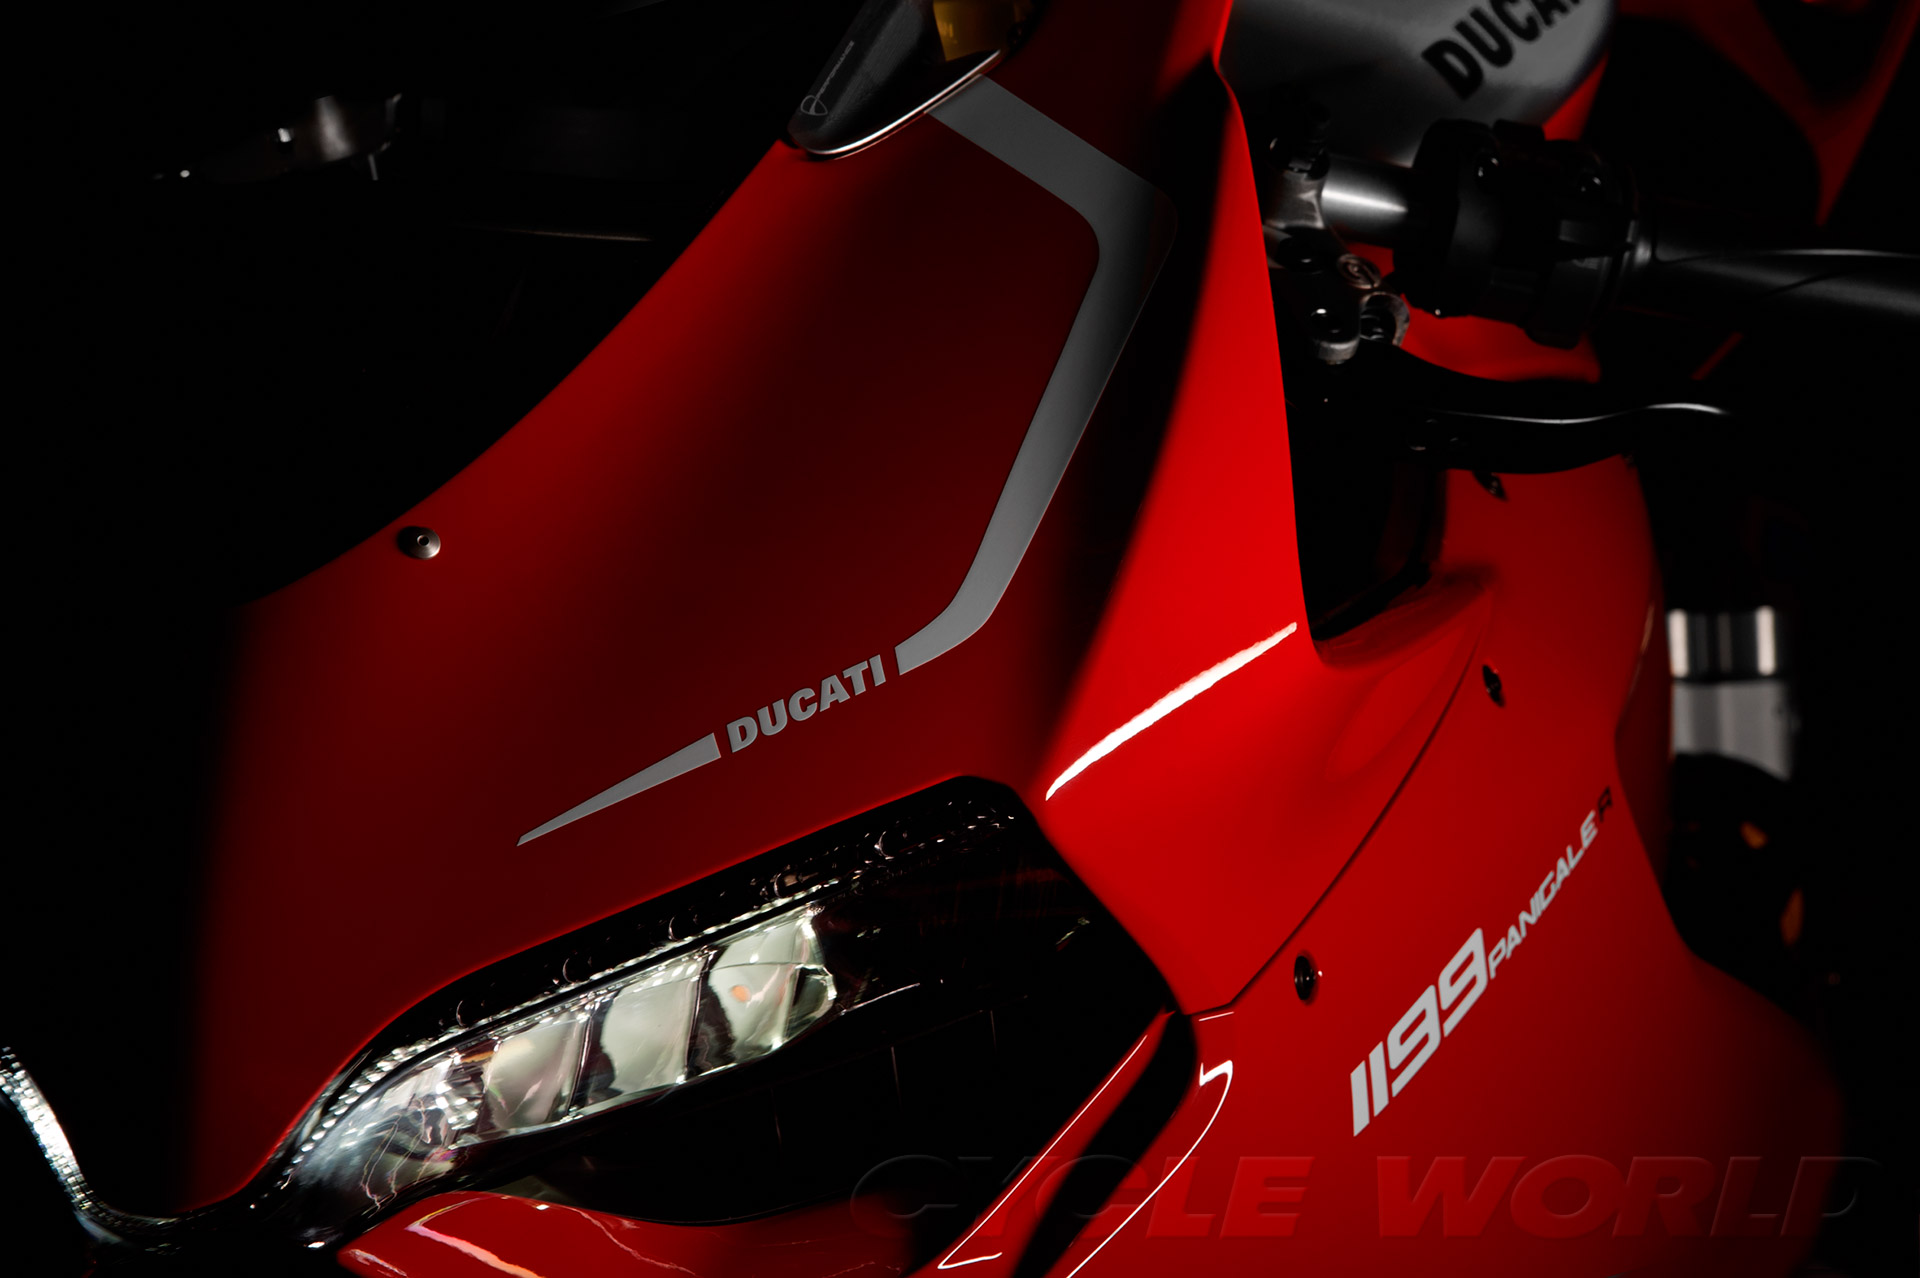 Ducati Panigale Front 24927 Hd Wallpapers in Bikes   Imagescicom 1920x1278